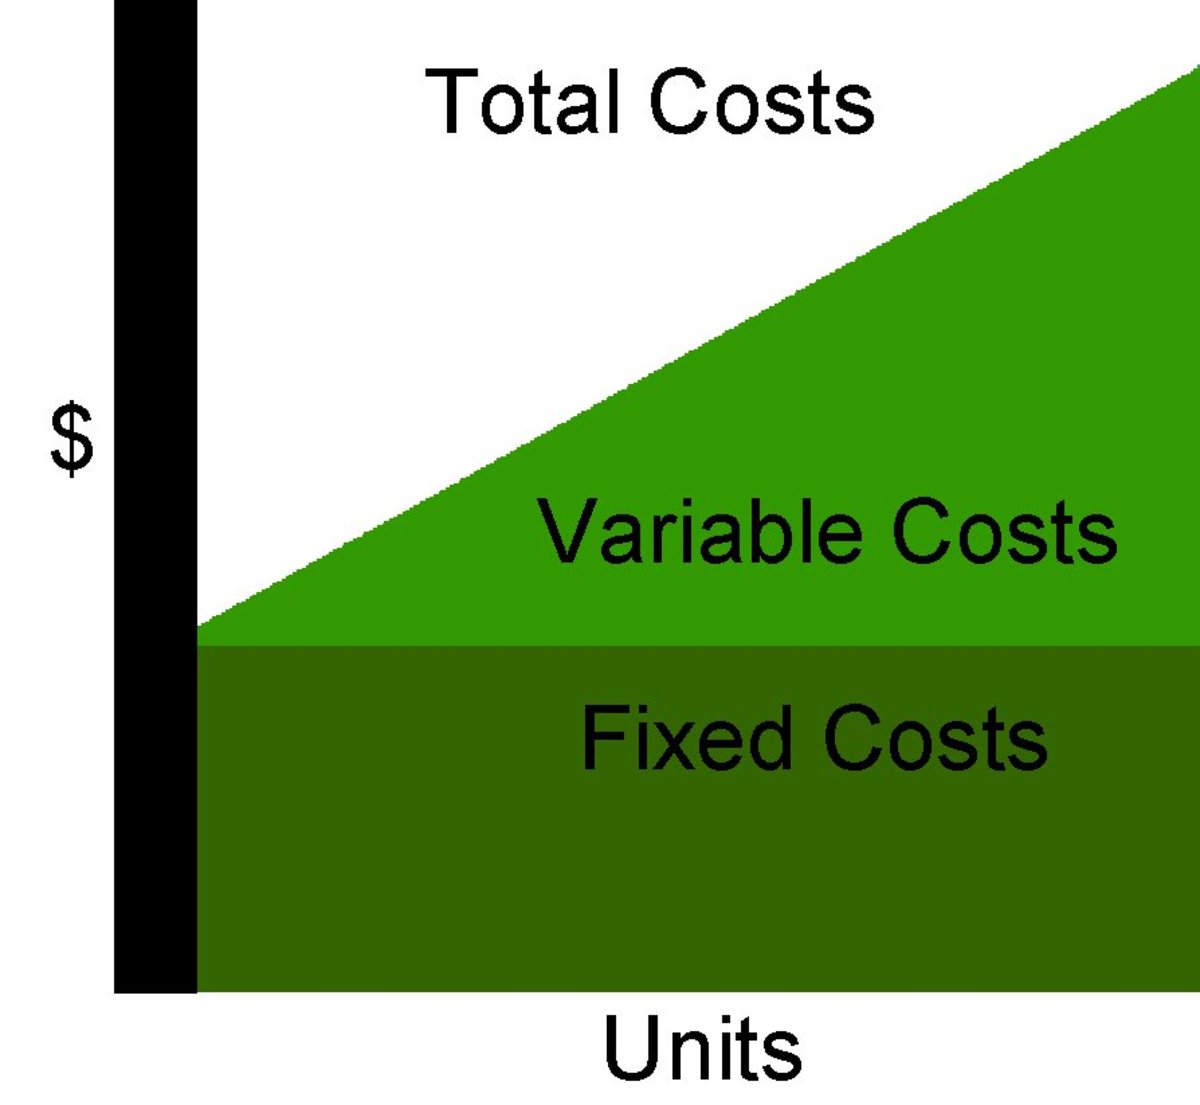 product-pricing-considerations-for-marketers